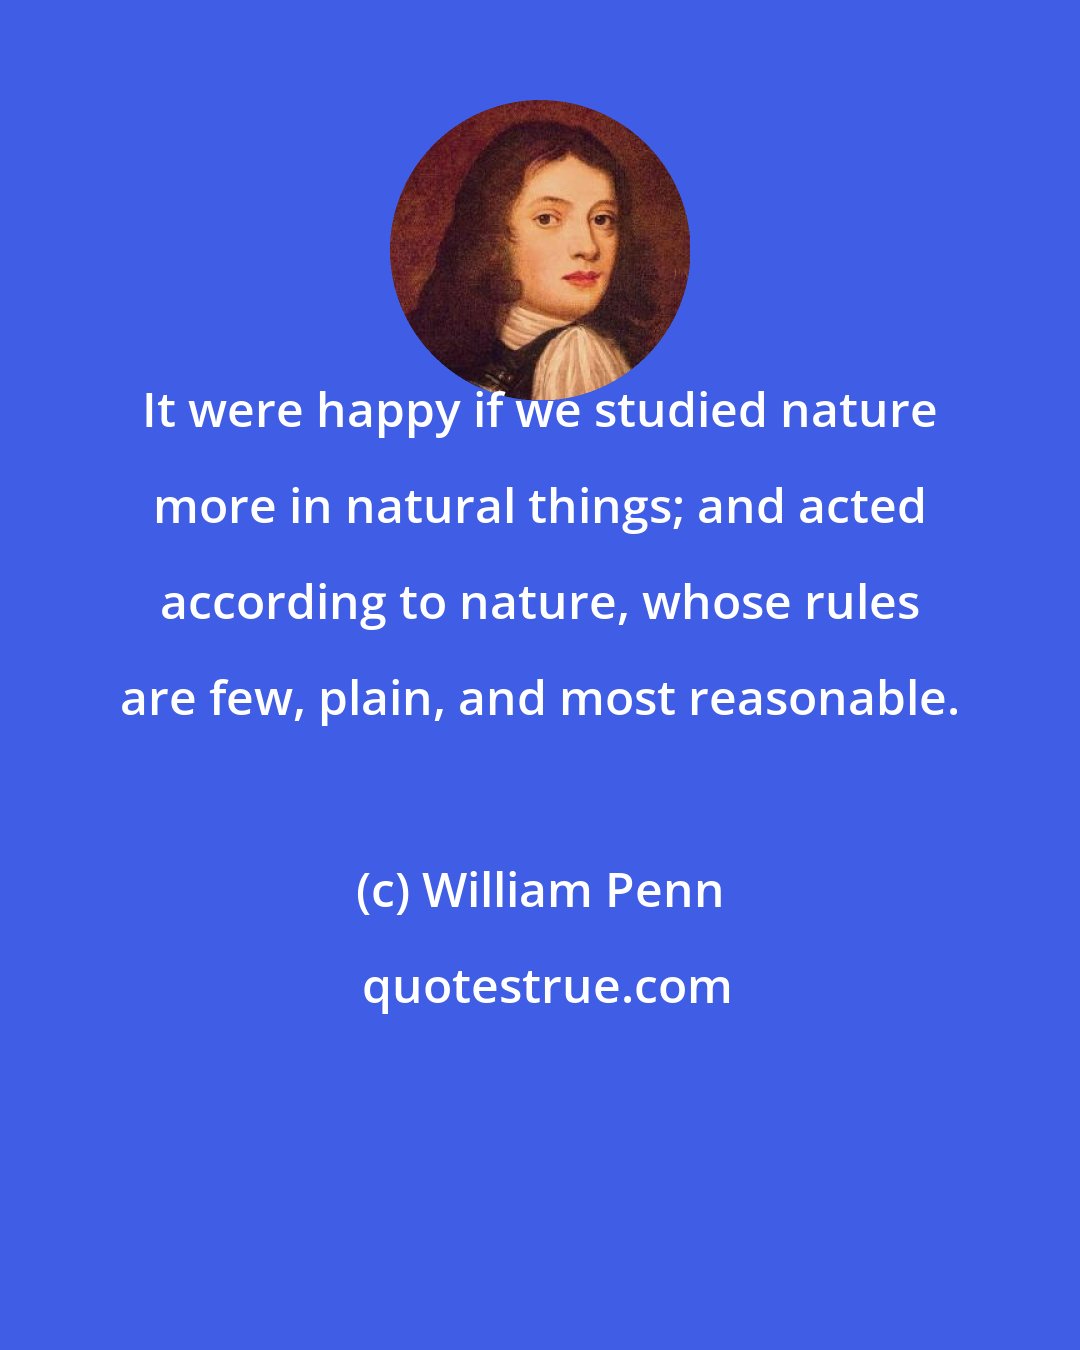 William Penn: It were happy if we studied nature more in natural things; and acted according to nature, whose rules are few, plain, and most reasonable.